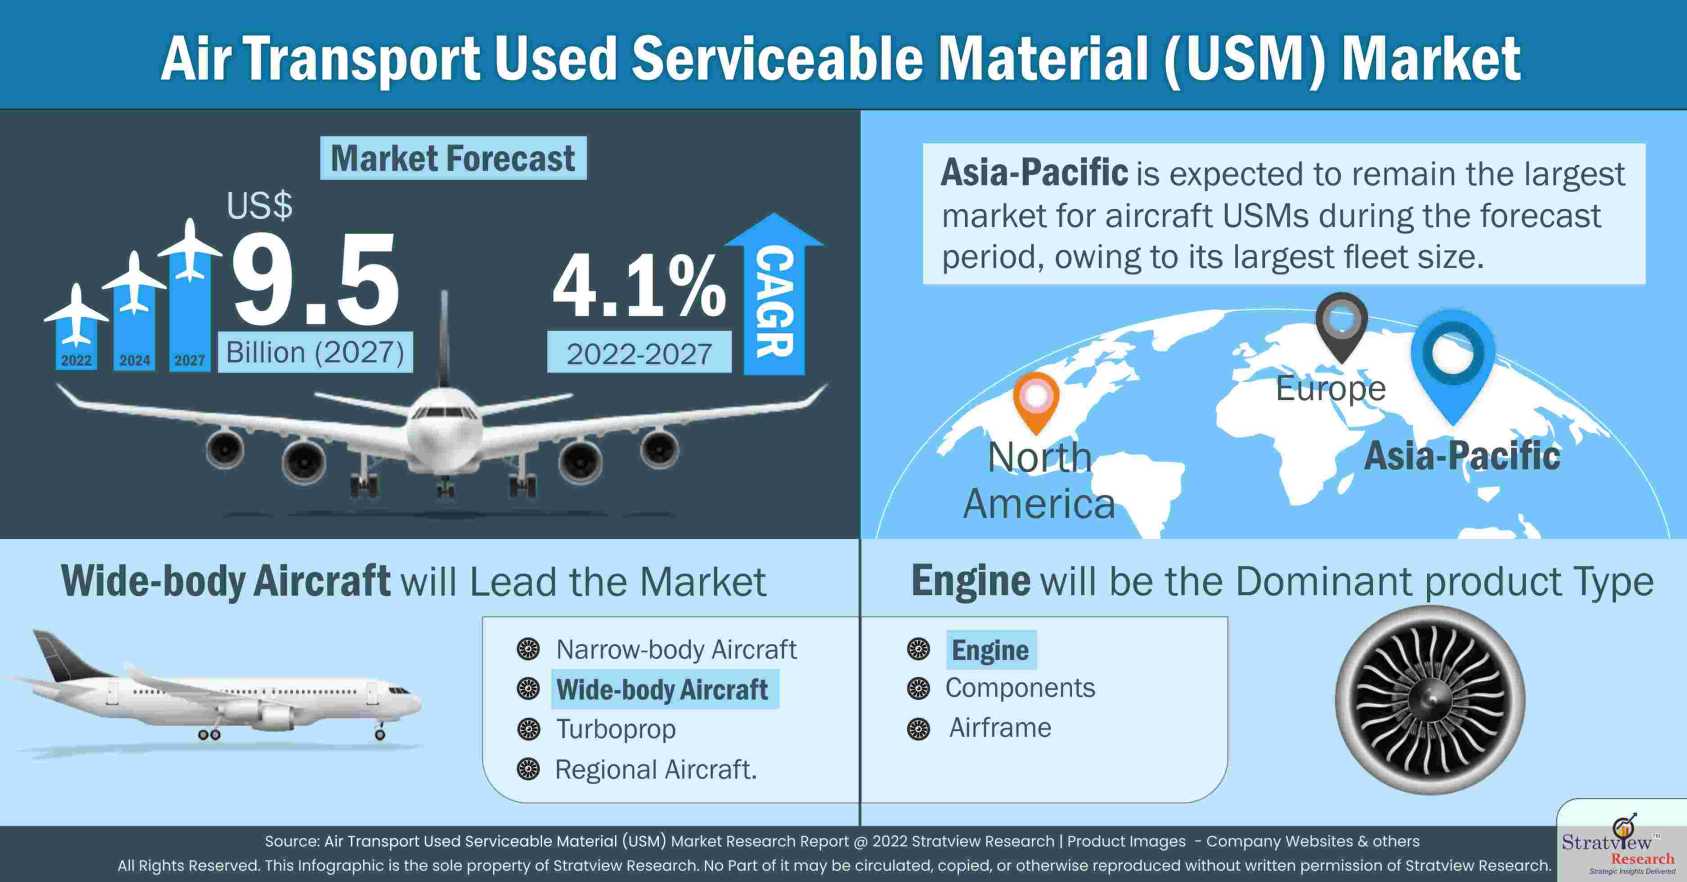 Air Transport Used Serviceable Material (USM) Market Analysis